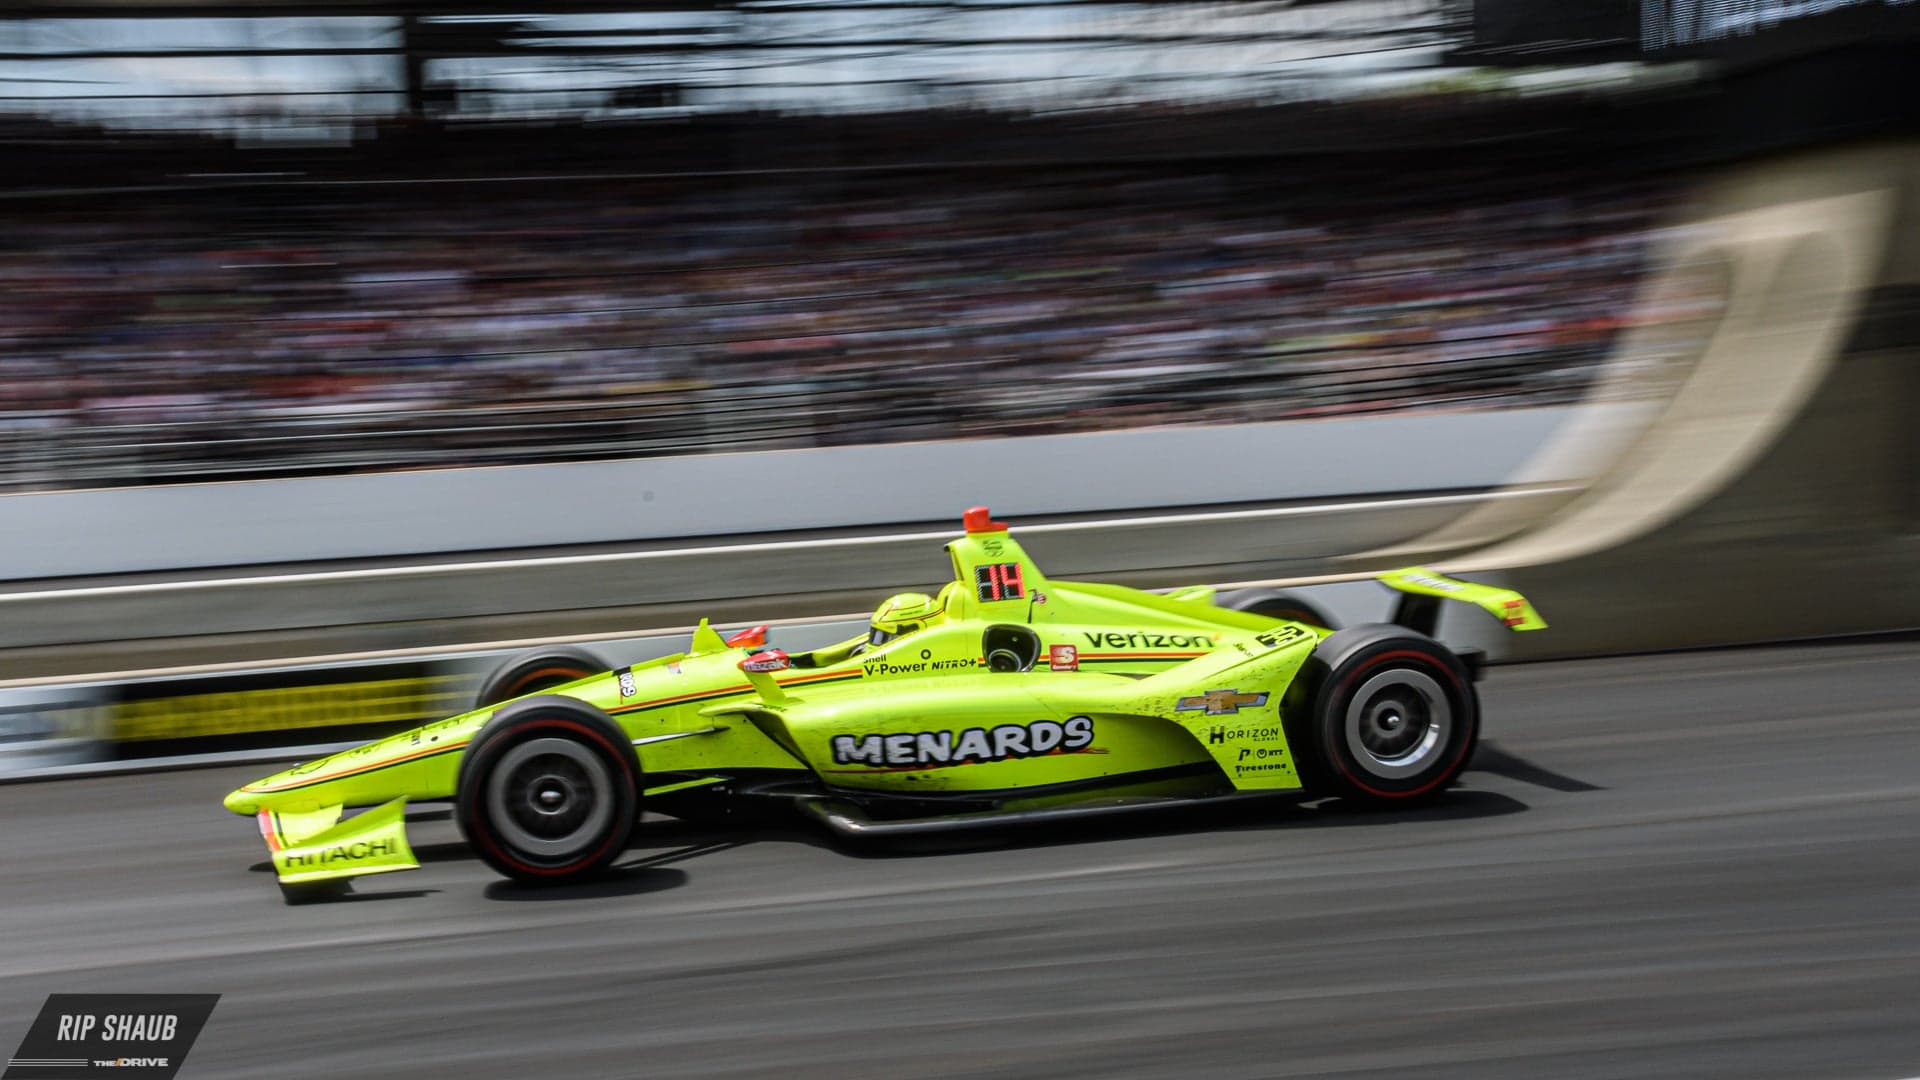 IndyCar: Simon Pagenaud and Team Penske Take Dominant Win at 2019 Indy 500